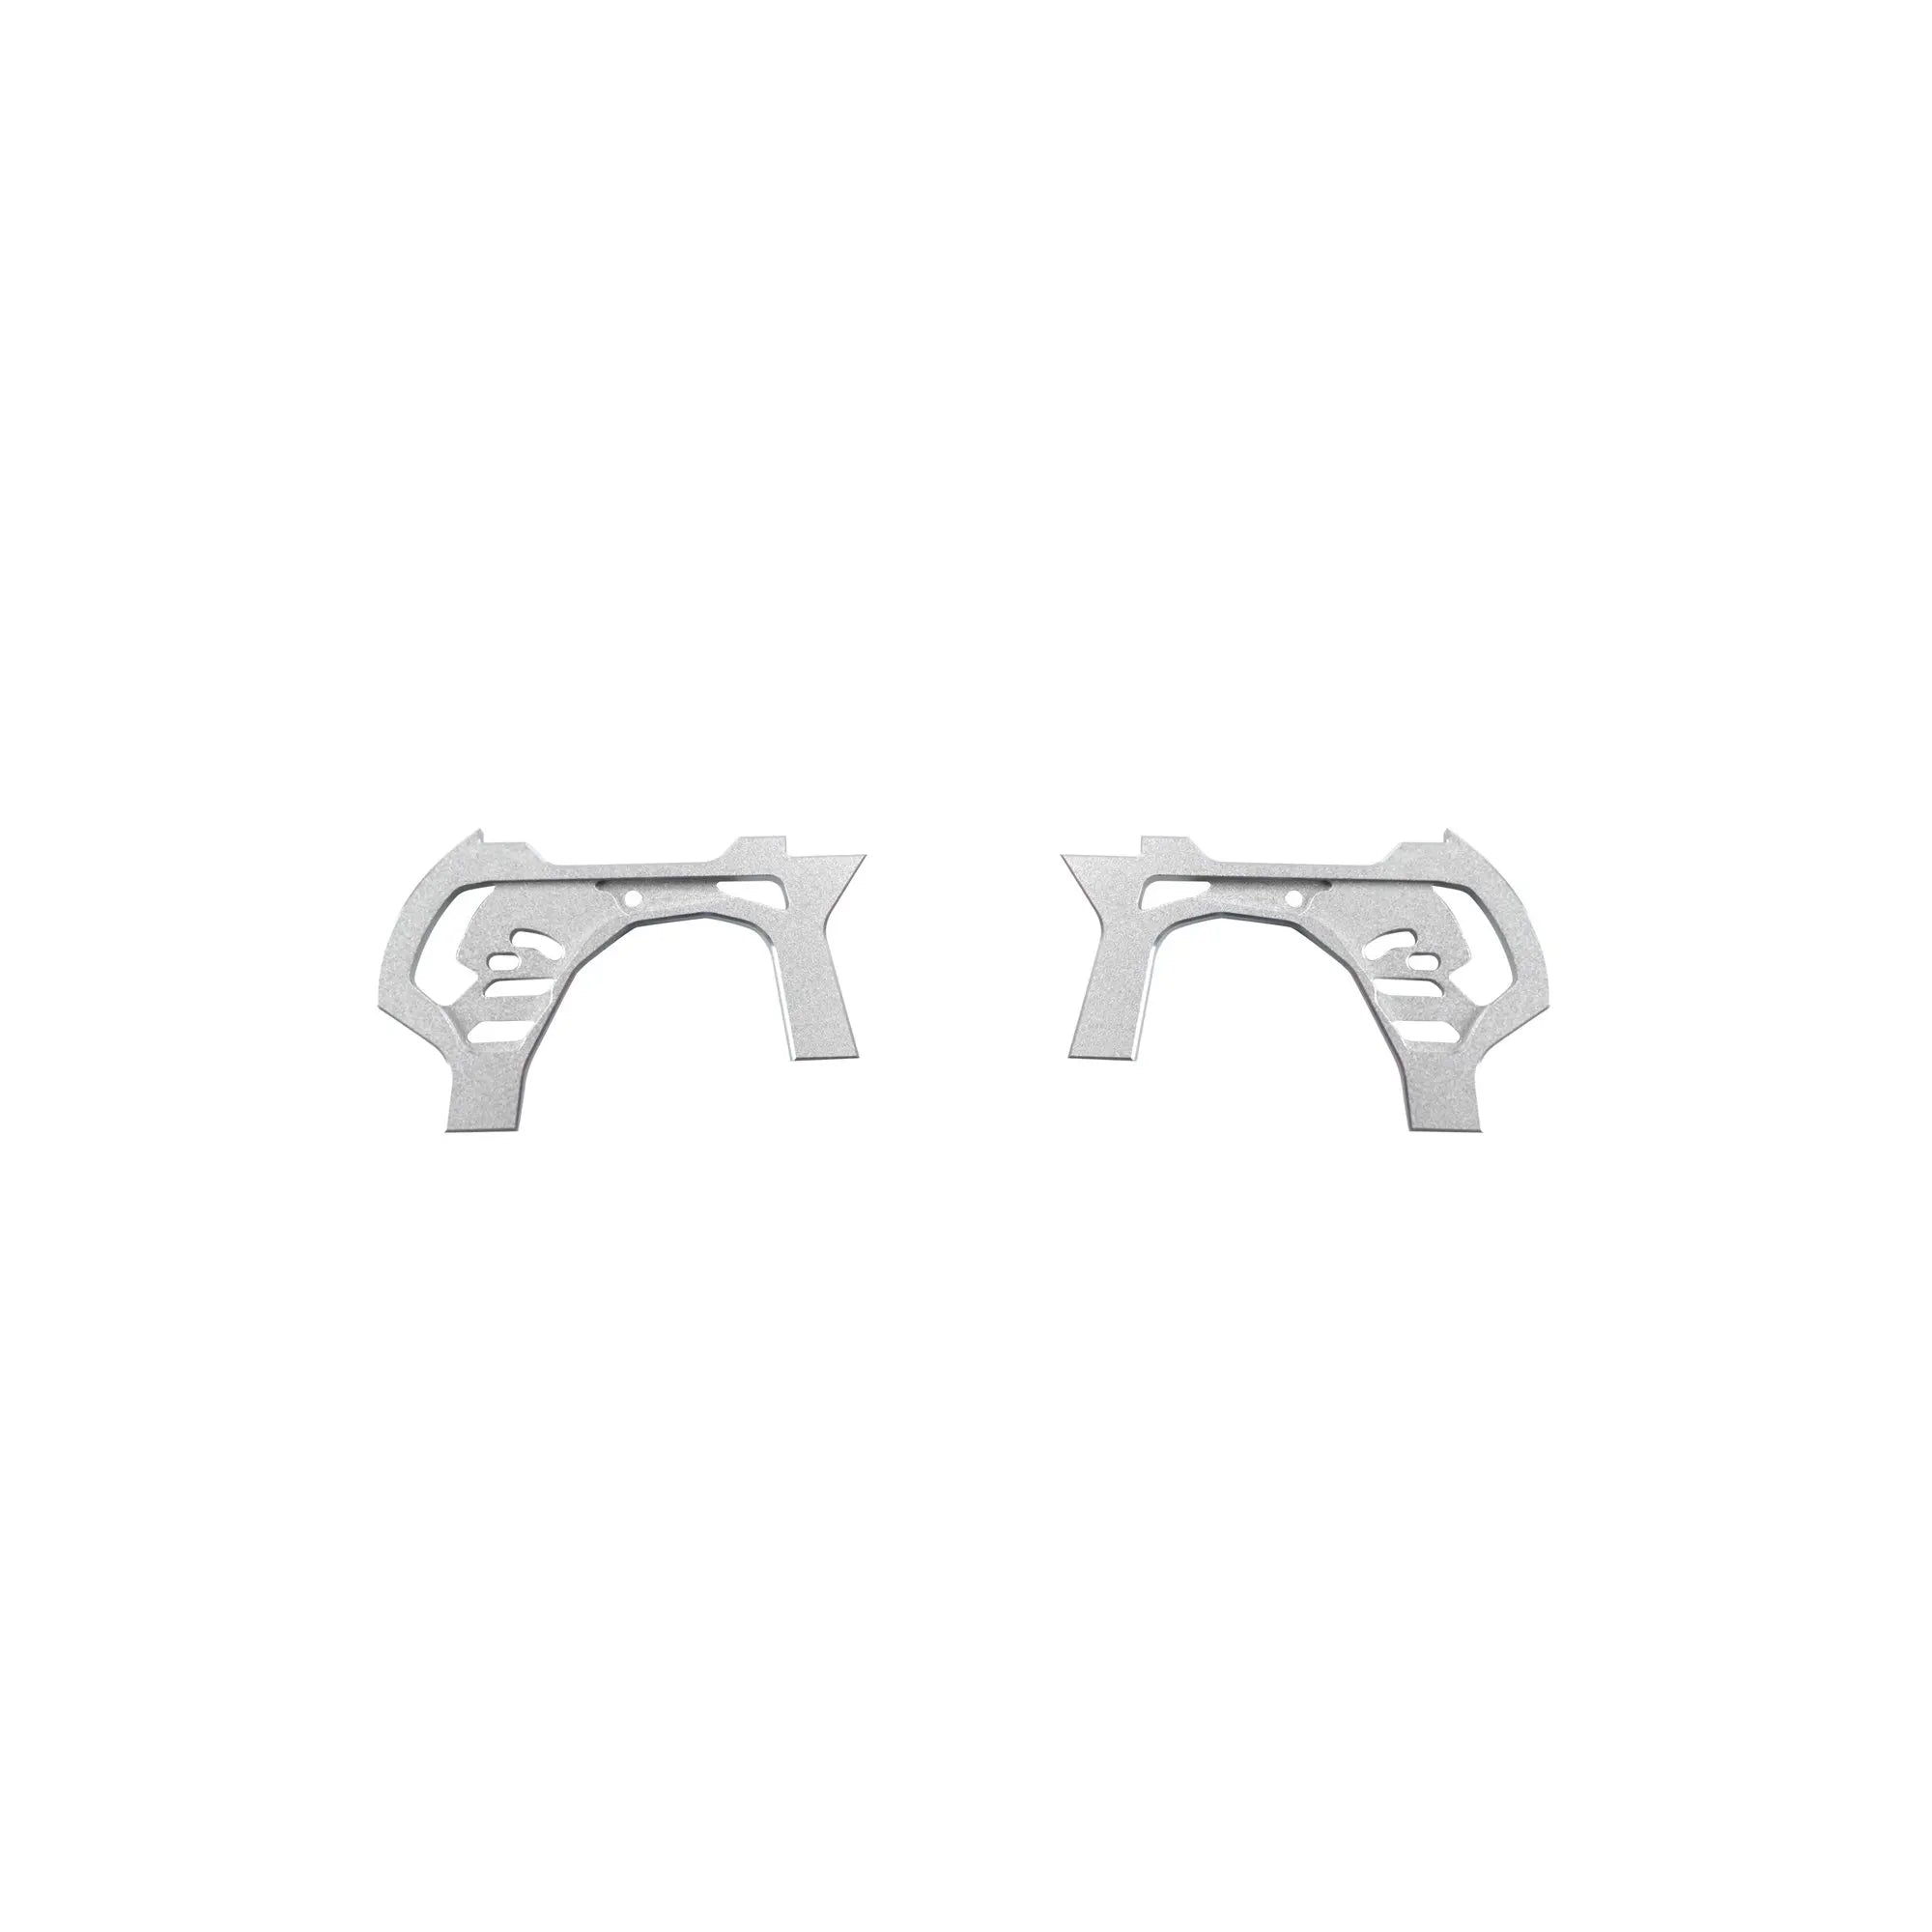 GEPRC GEP-MK5 Frame Parts Material : Composite Material Four-